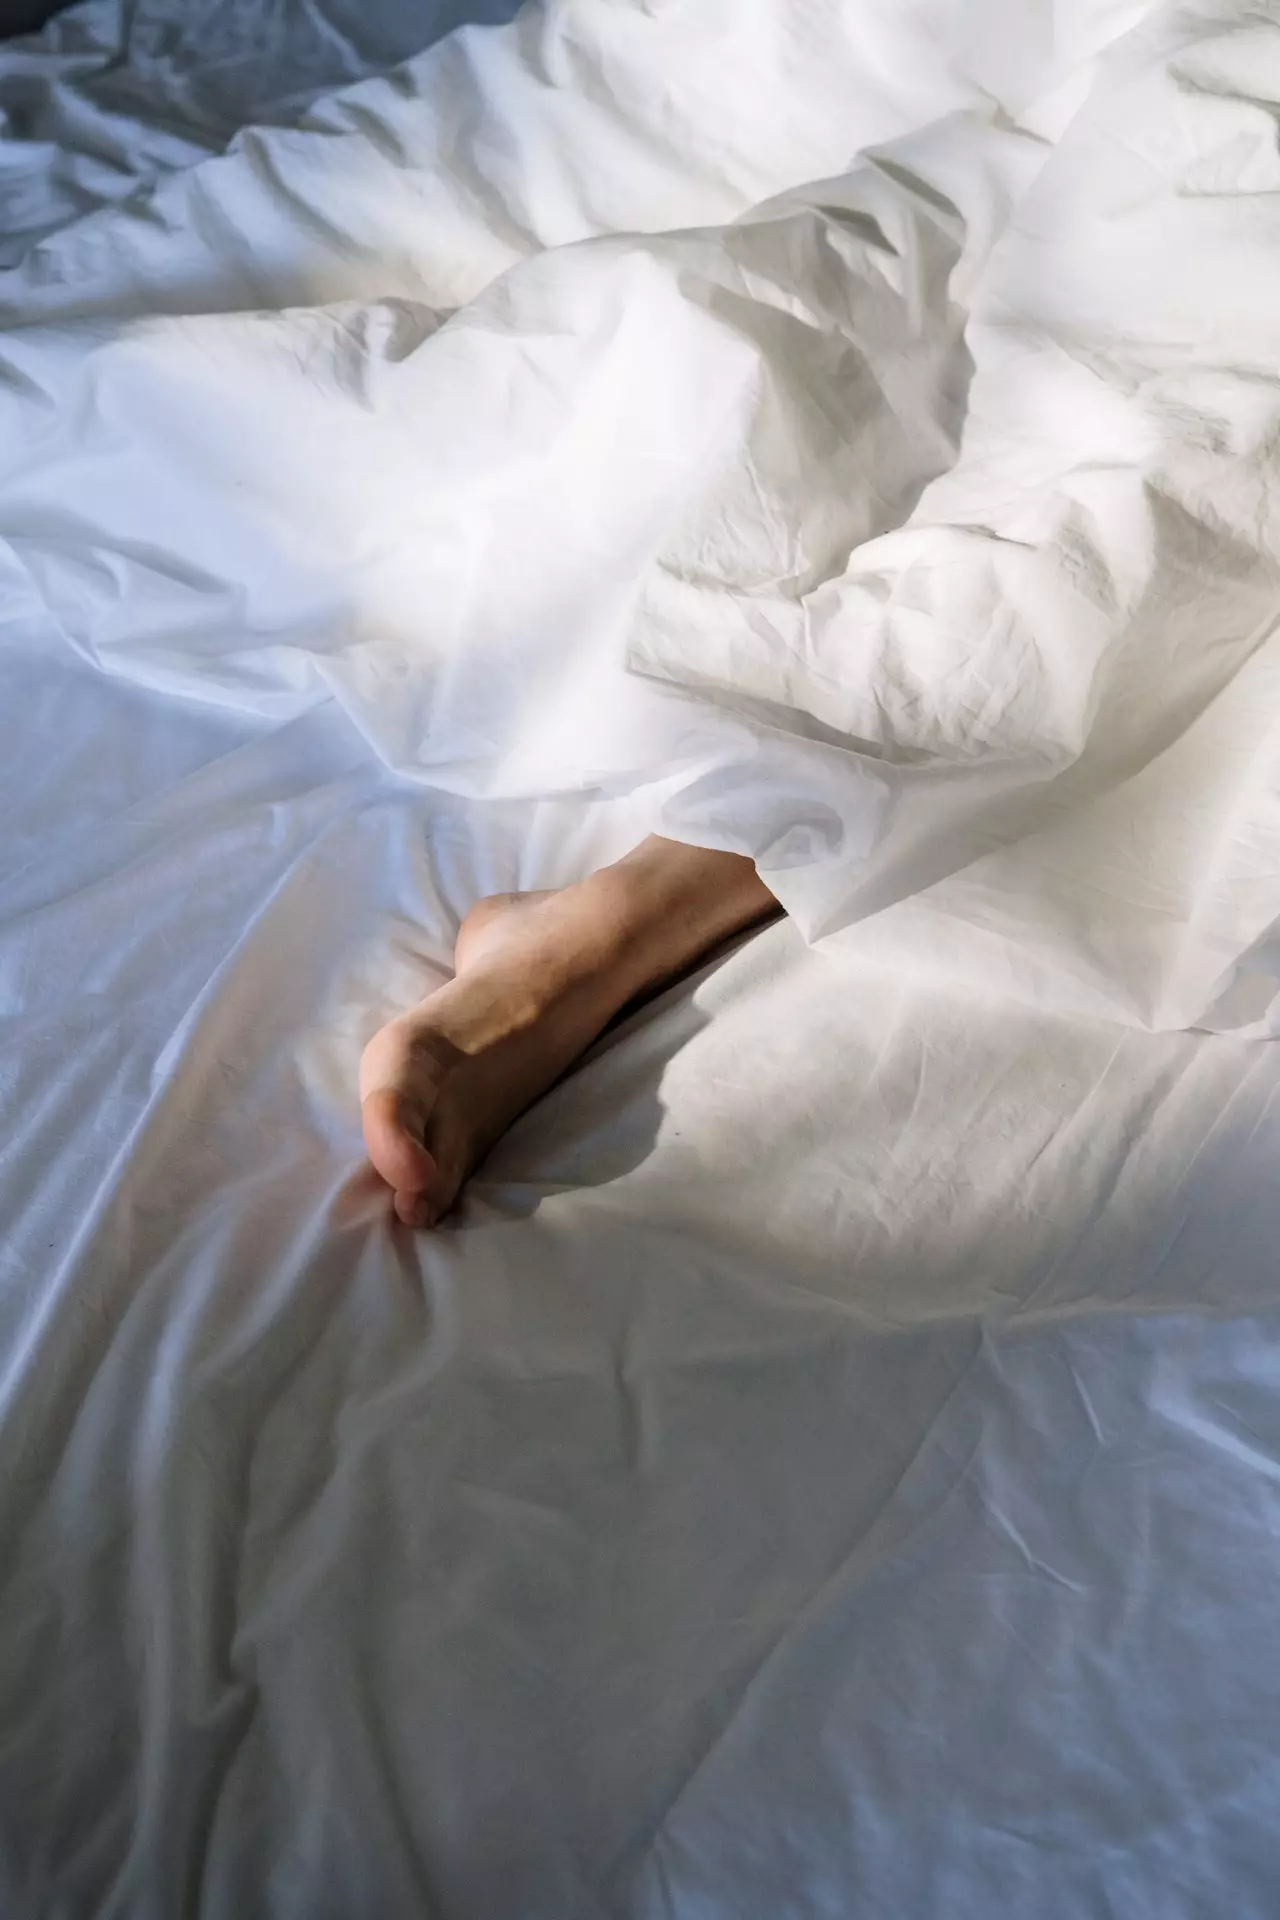 If you're experiencing night sweats there could be a number of reasons why (